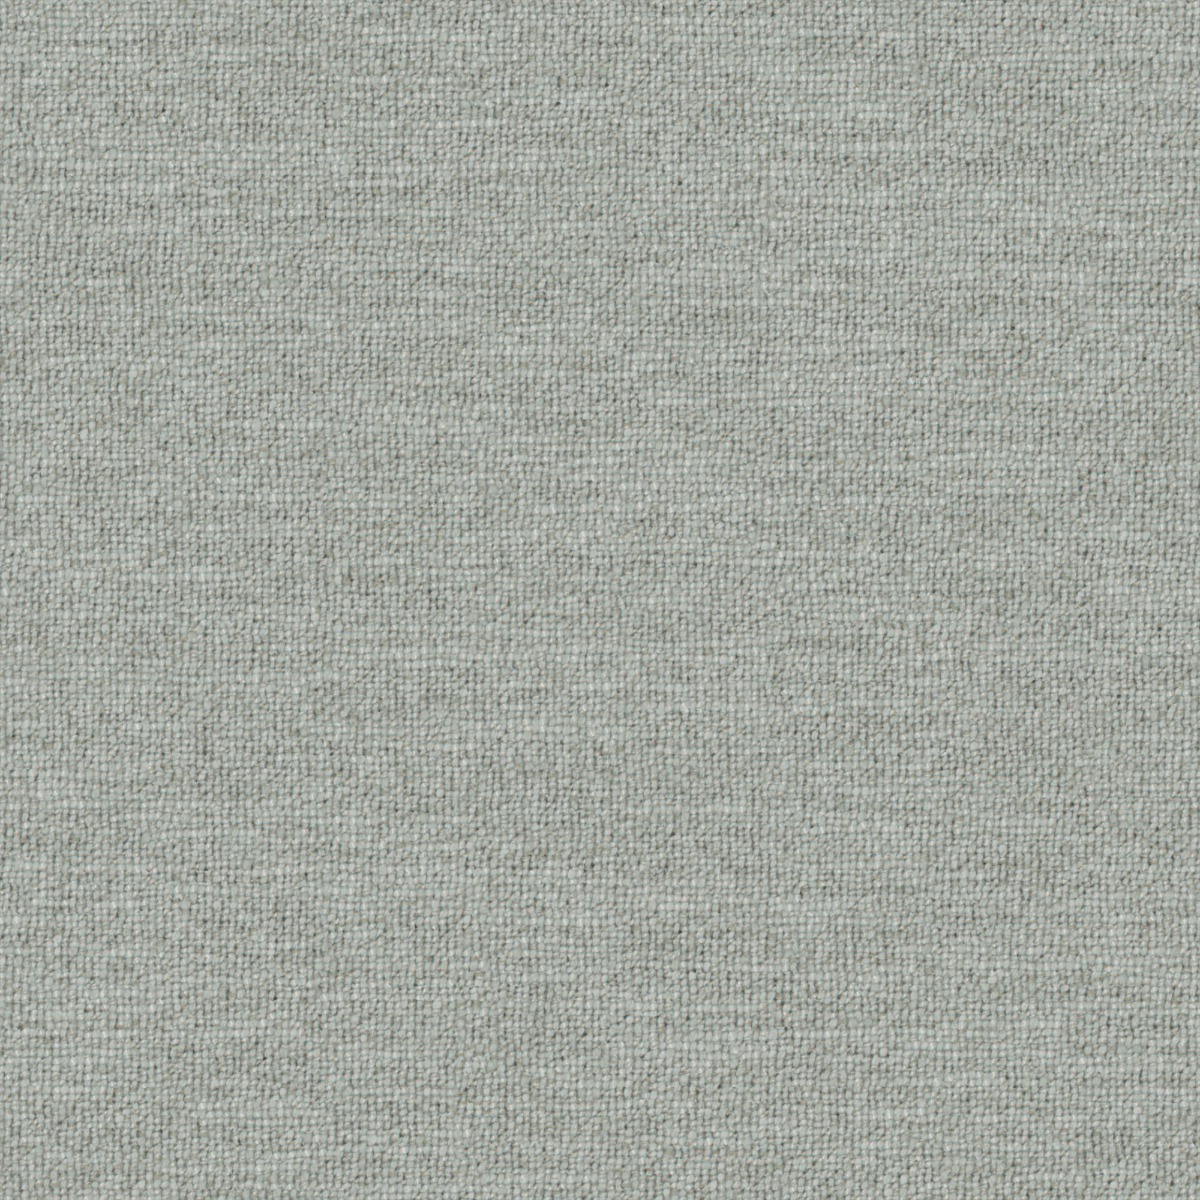 A seamless fabric texture with plain green texture units arranged in a None pattern